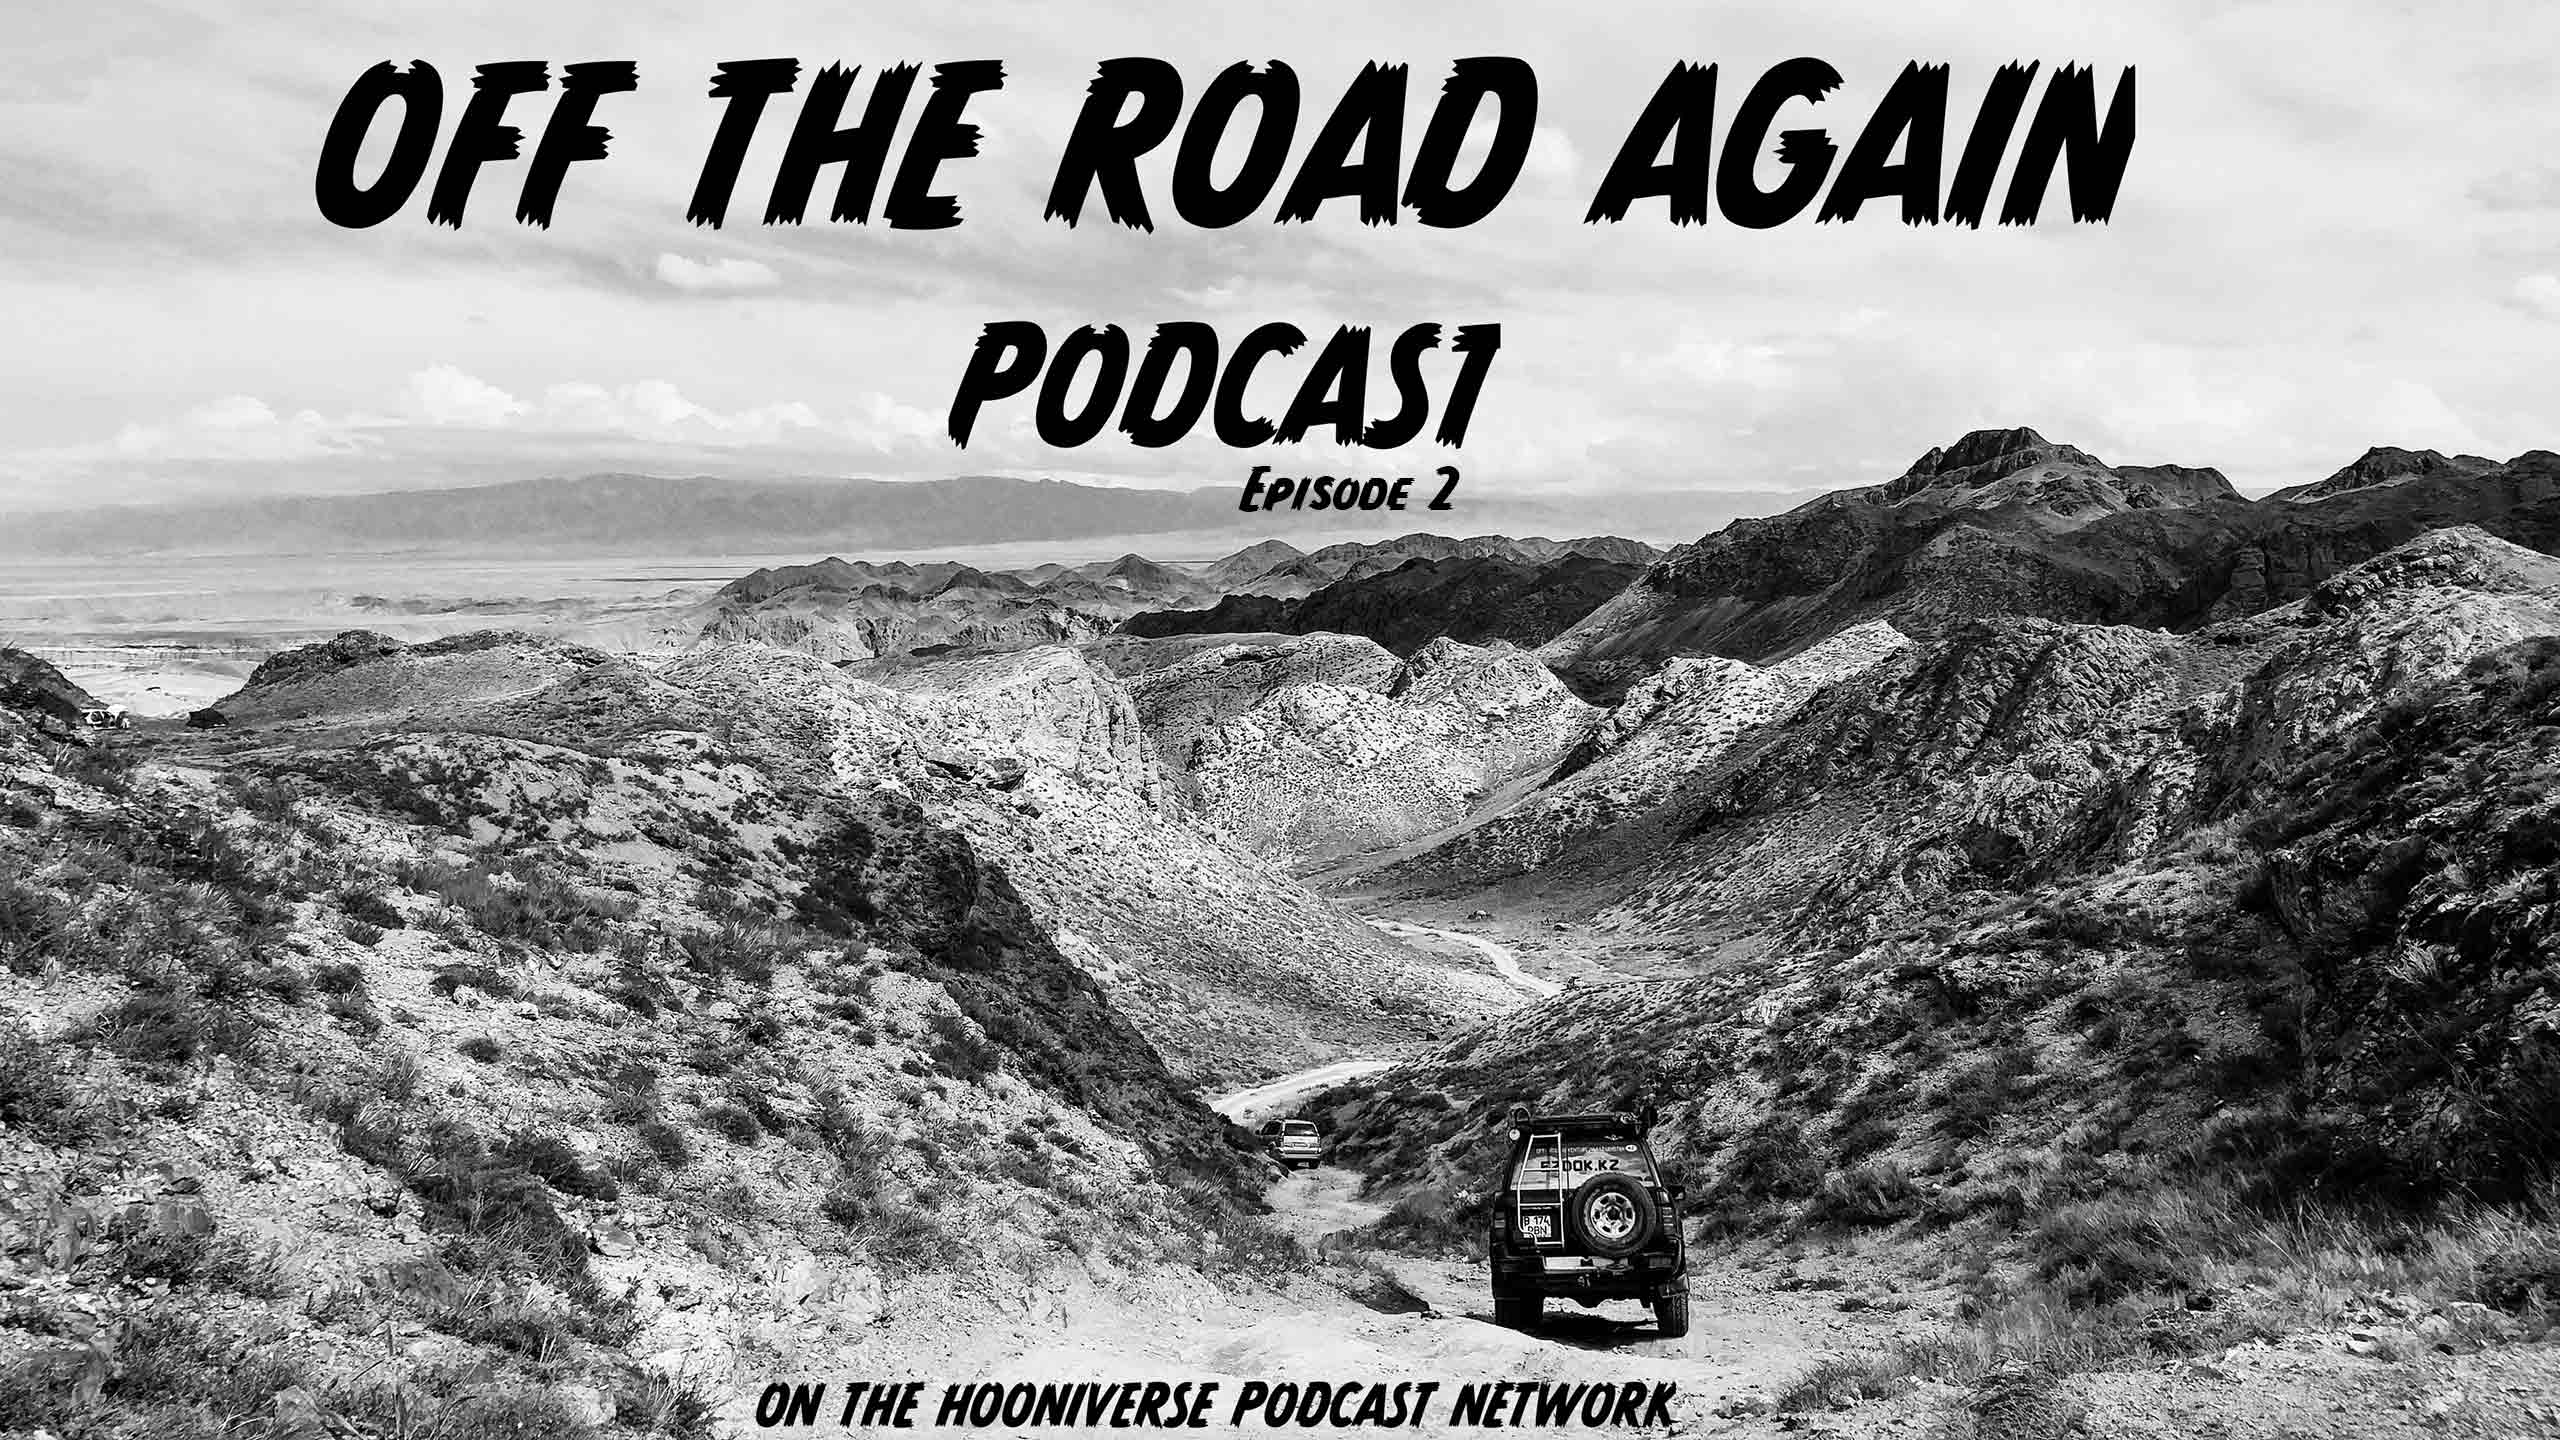 Off the Road Again Podcast Episode 2